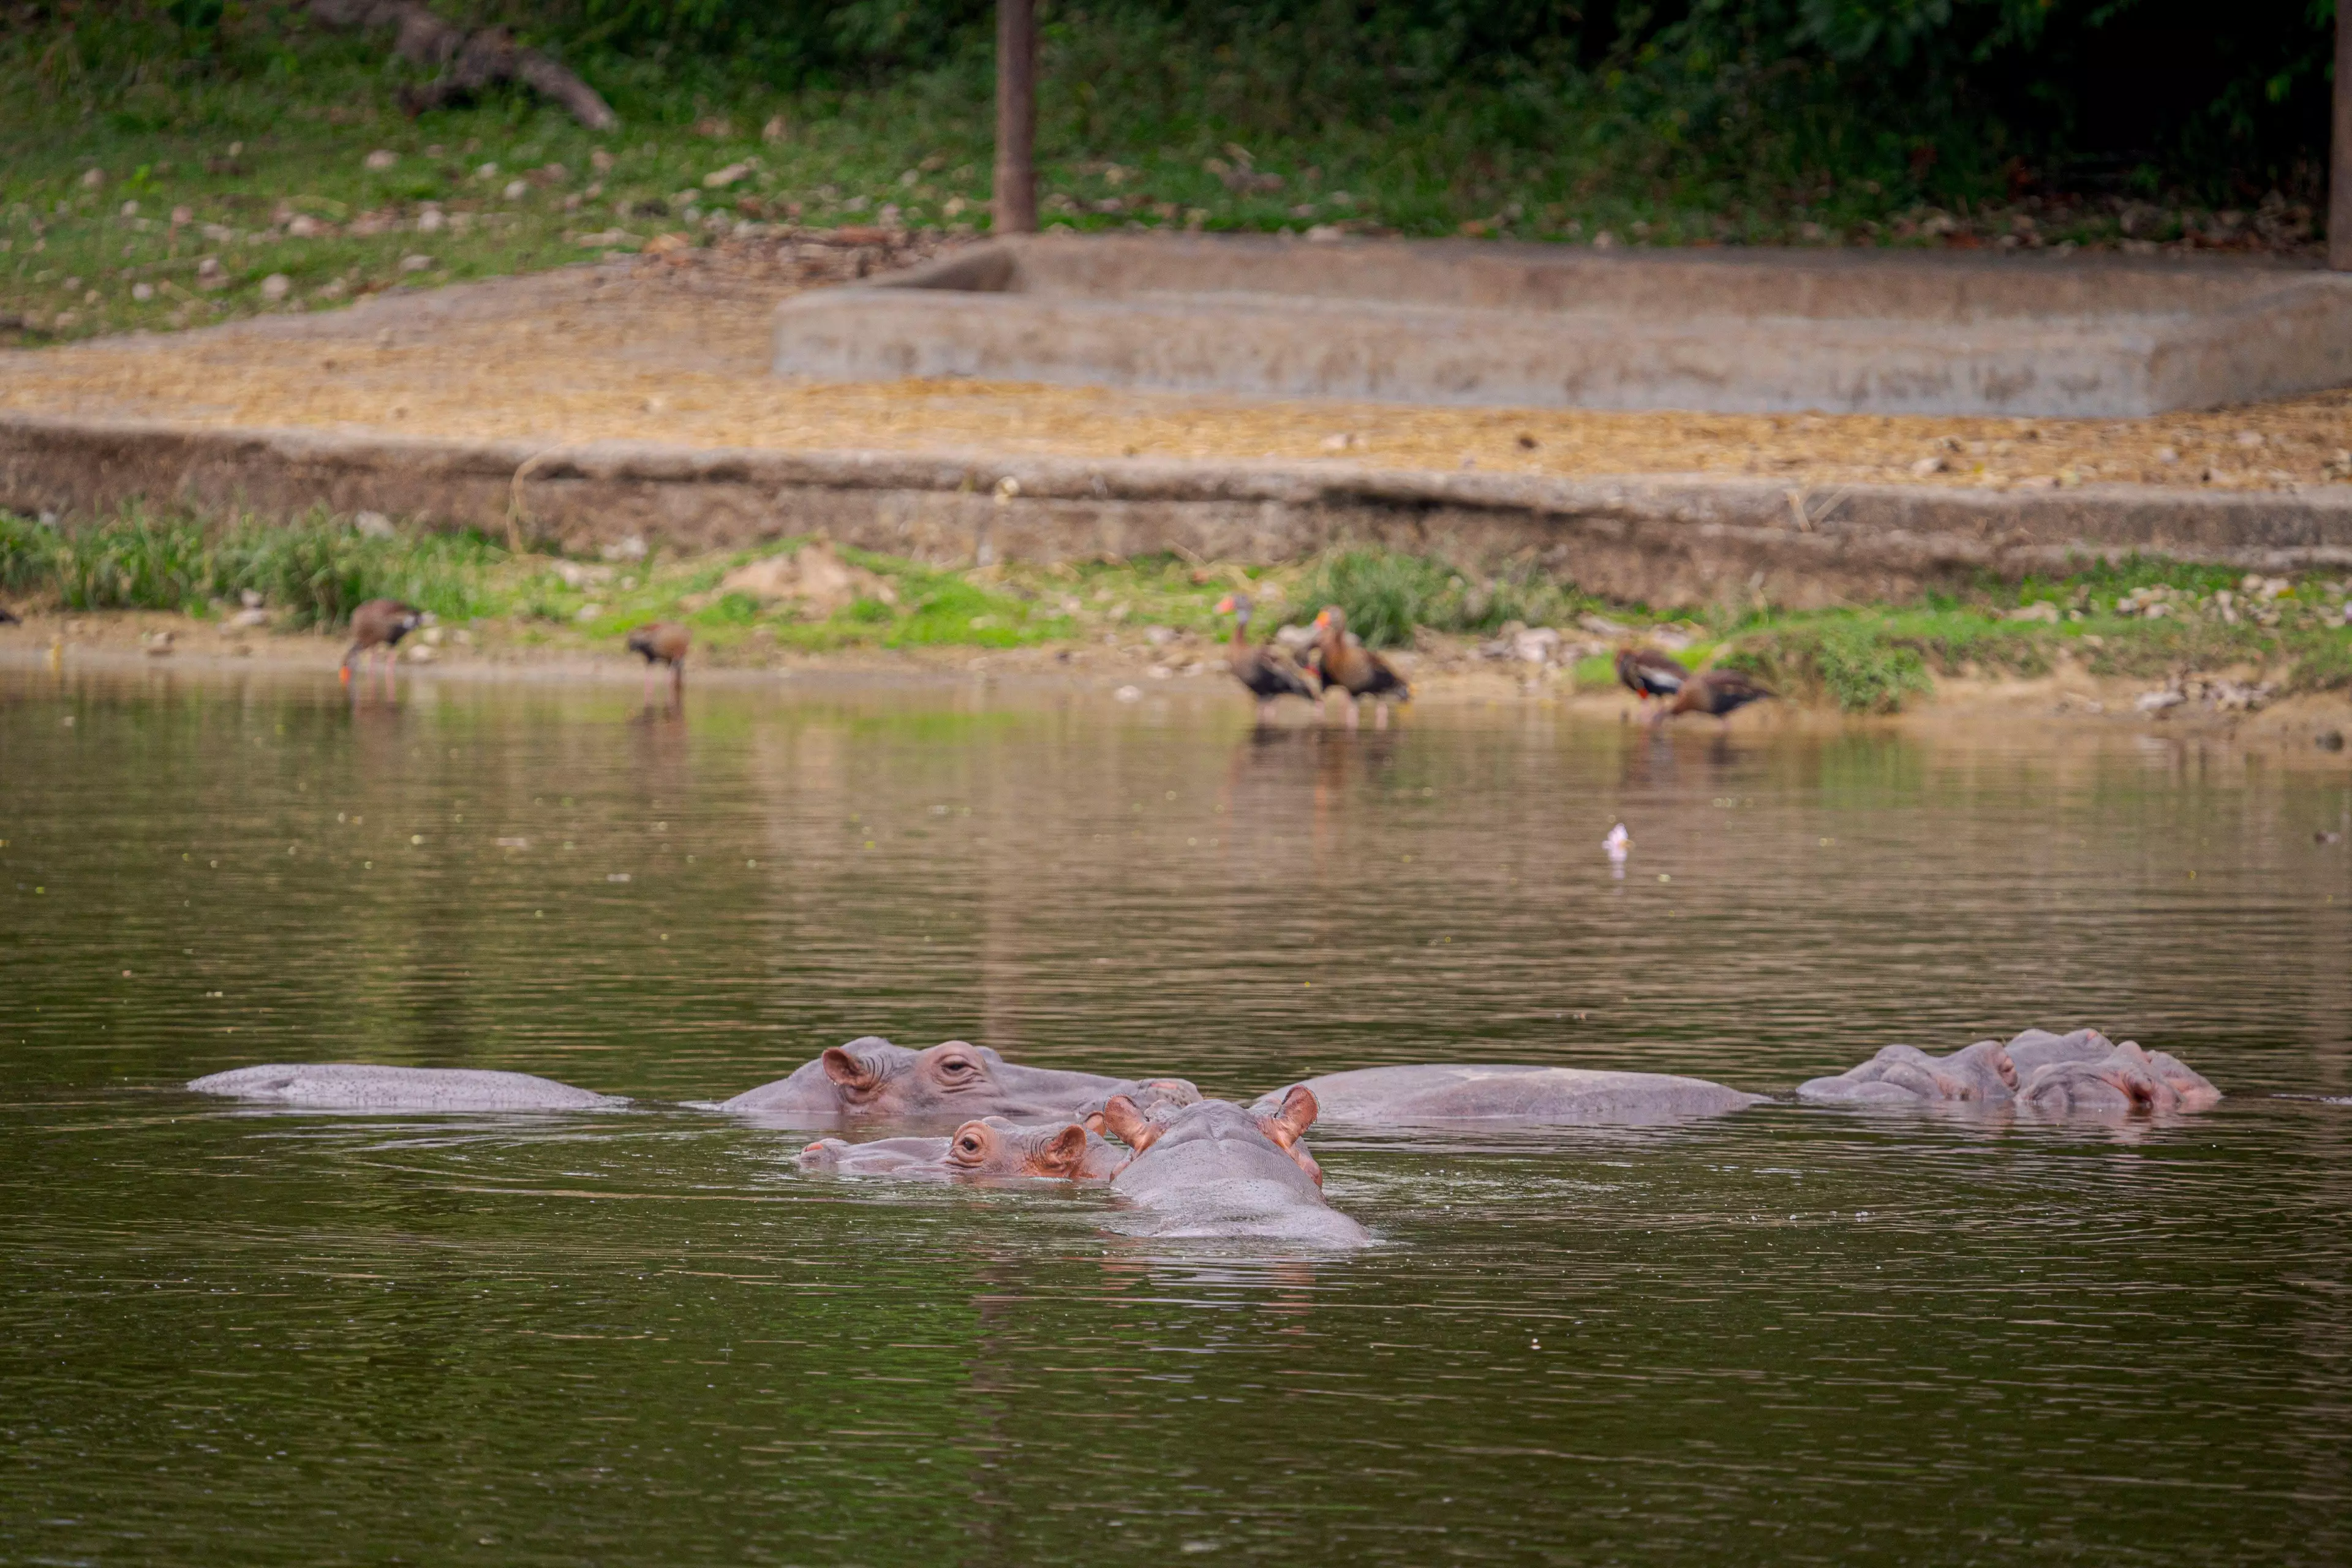 Hippos in one of the lakes at Hacienda Napoles.